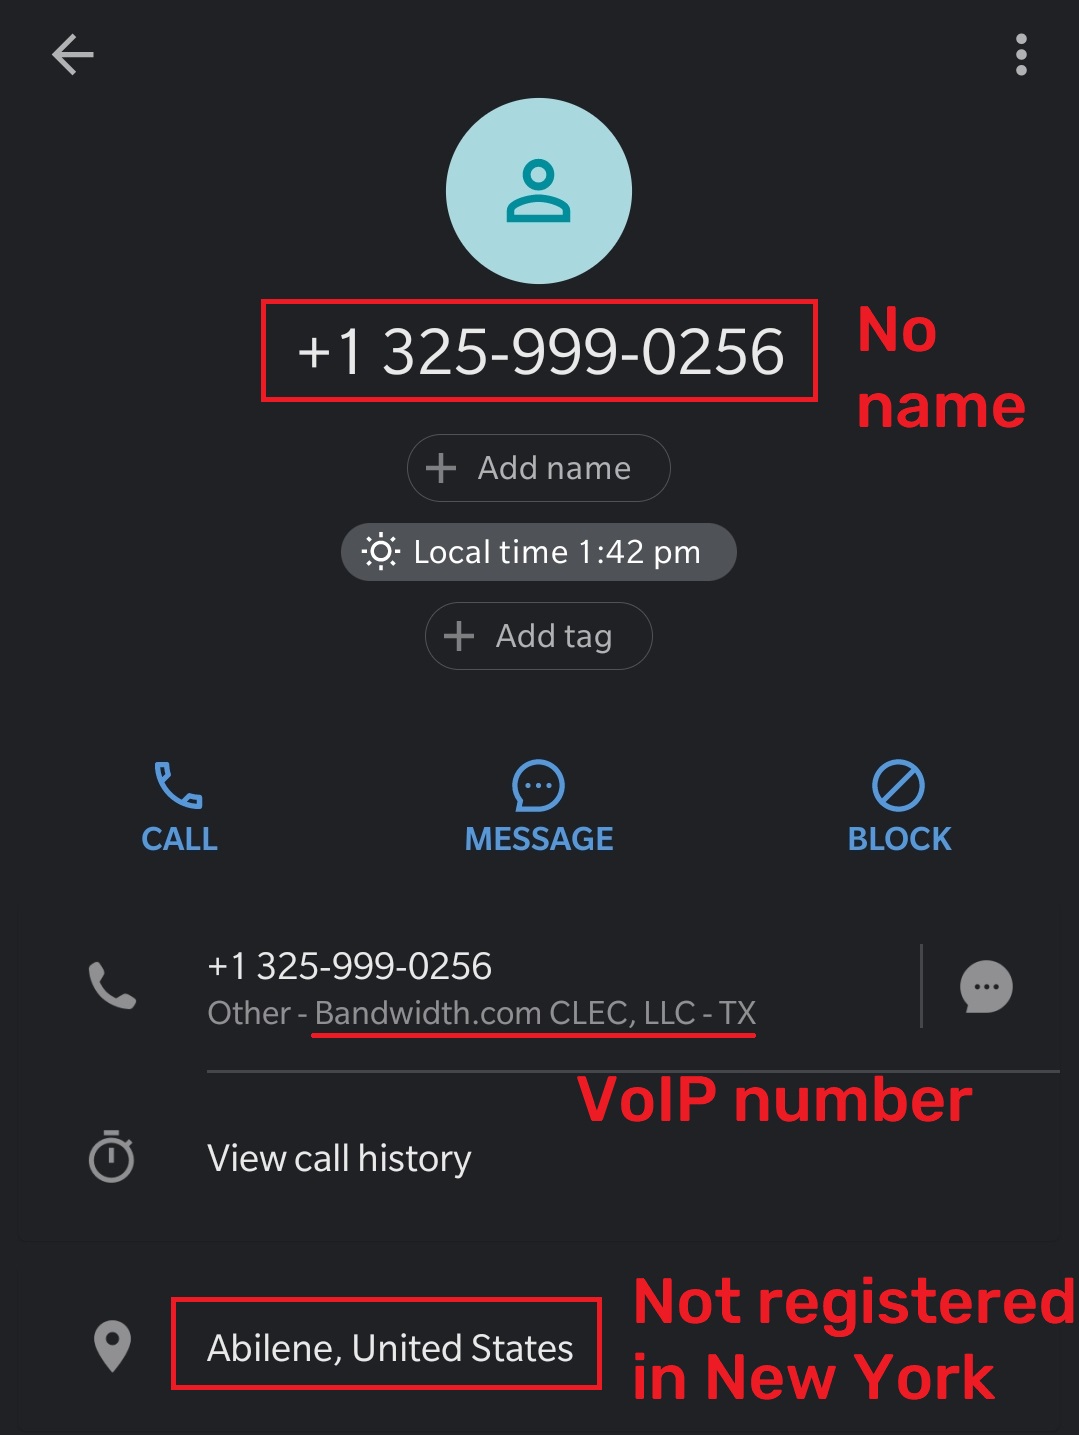 beamcolony scam fake phone number